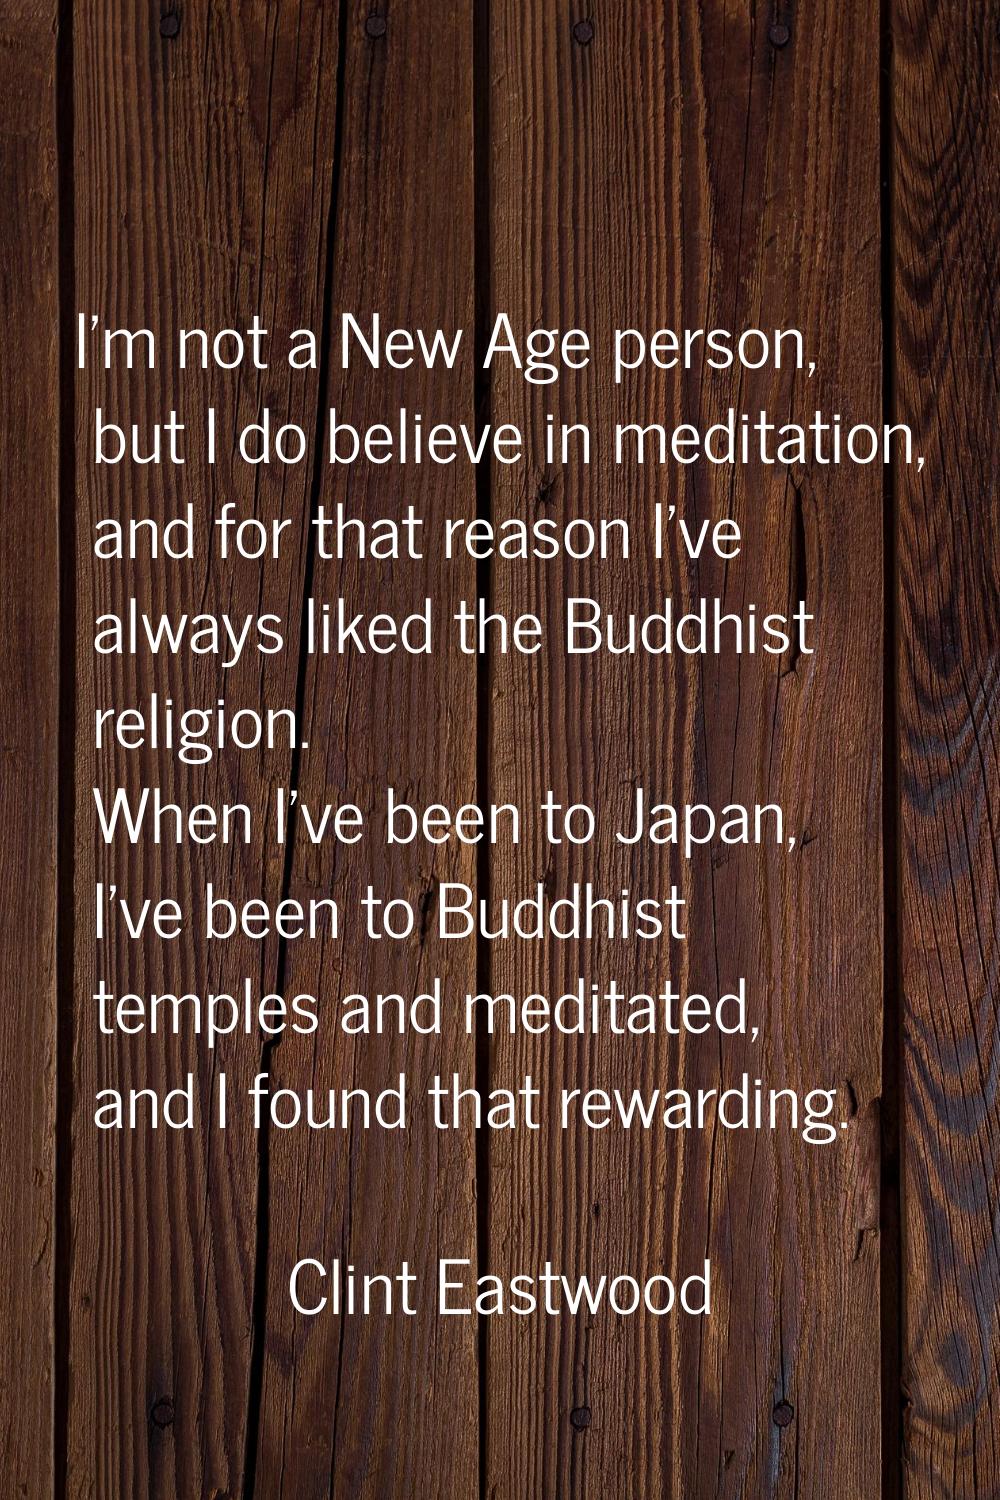 I'm not a New Age person, but I do believe in meditation, and for that reason I've always liked the